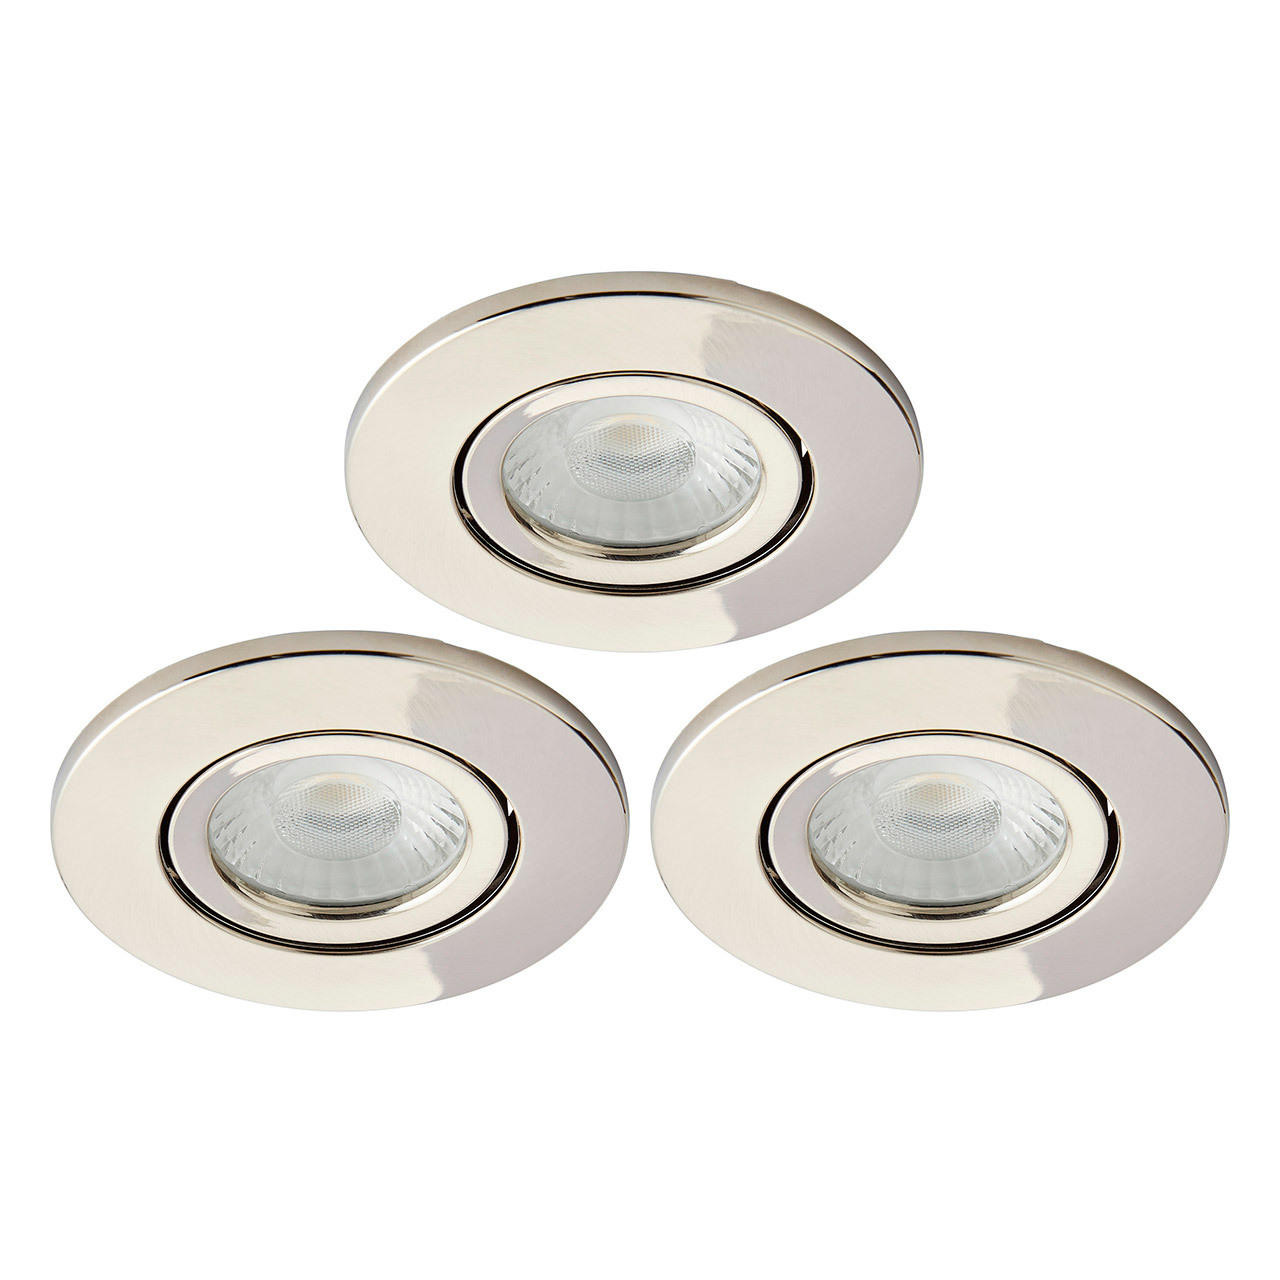 Spa Como LED Tiltable Fire Rated Downlight 5W Dimmable (3 Pack) Cool White Satin Nickel IP65